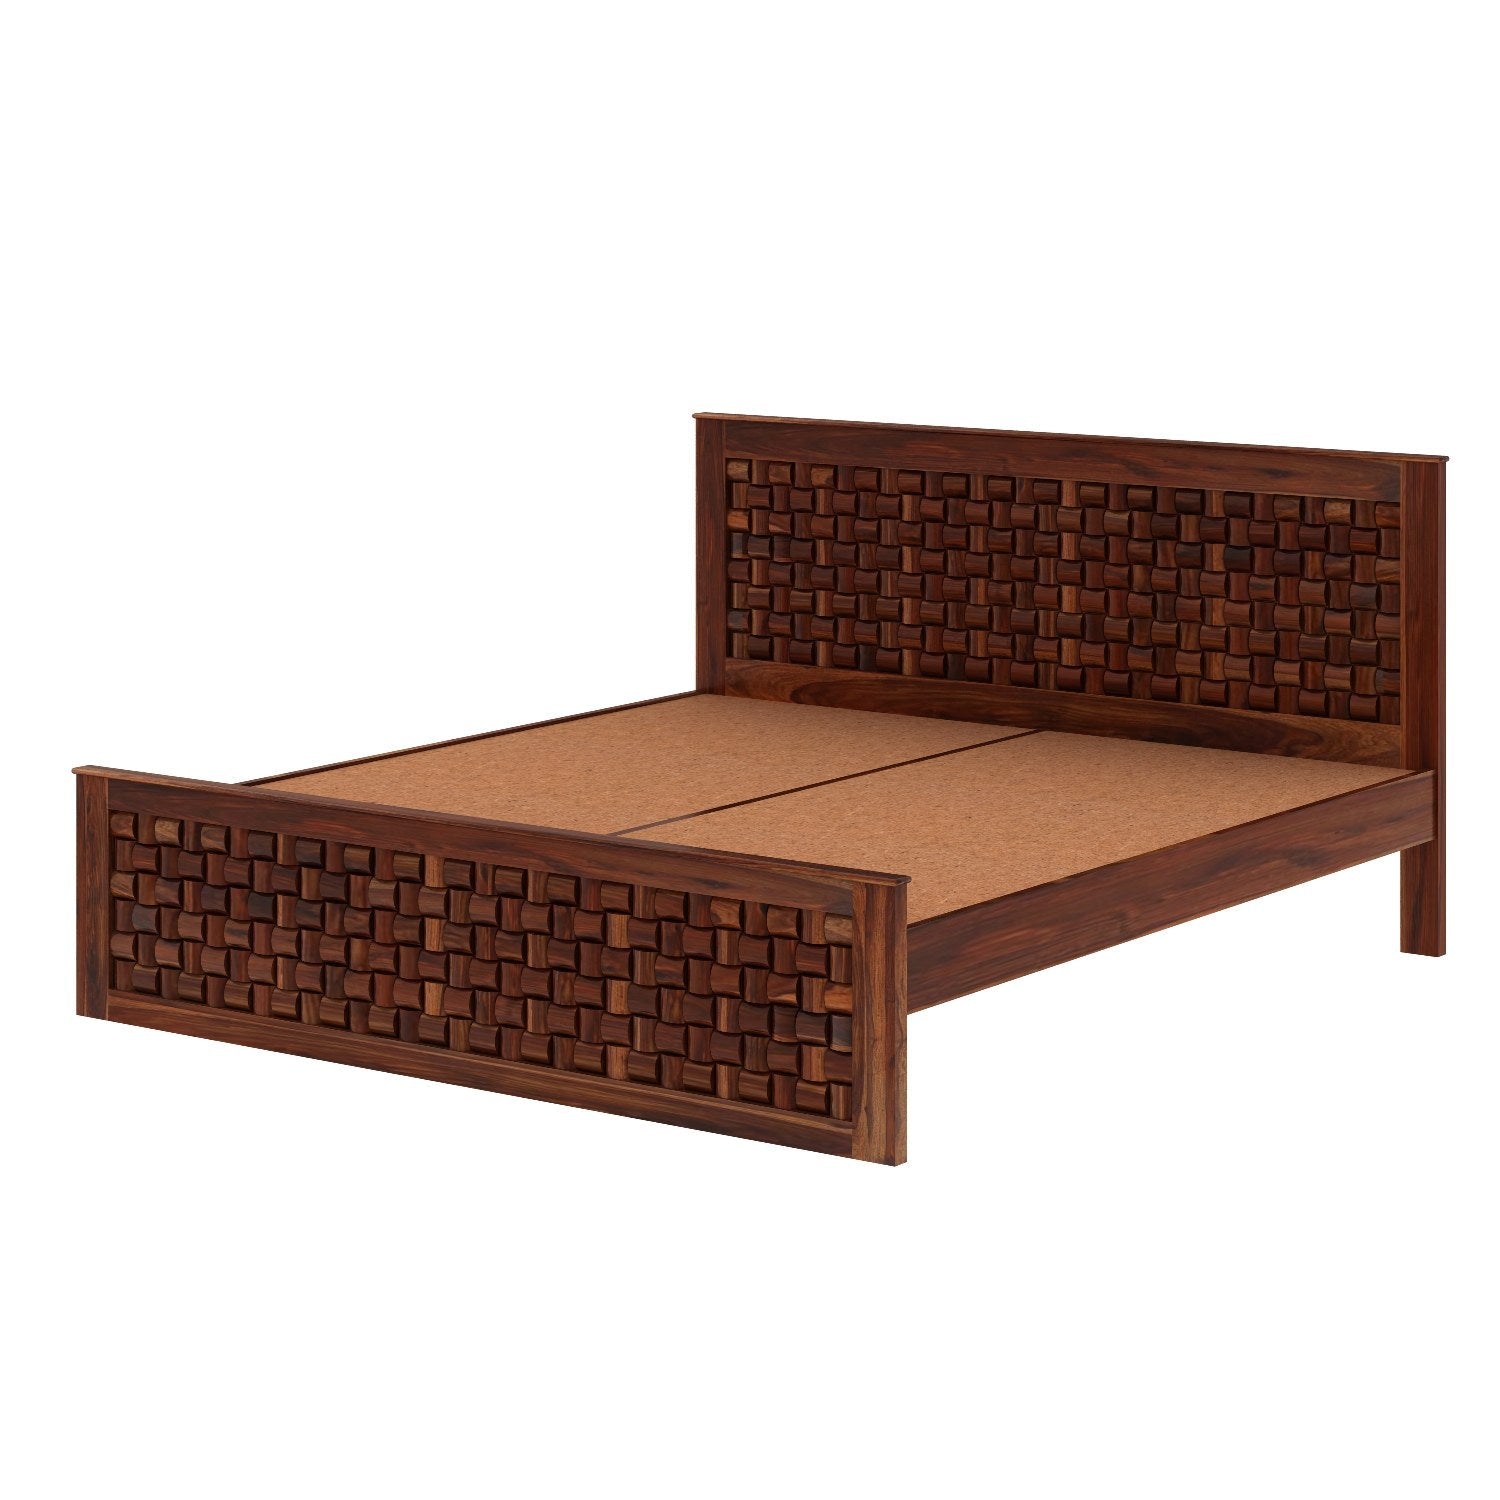 Olivia Solid Sheesham Wood Bed Without Storage (Queen Size, Natural Finish)